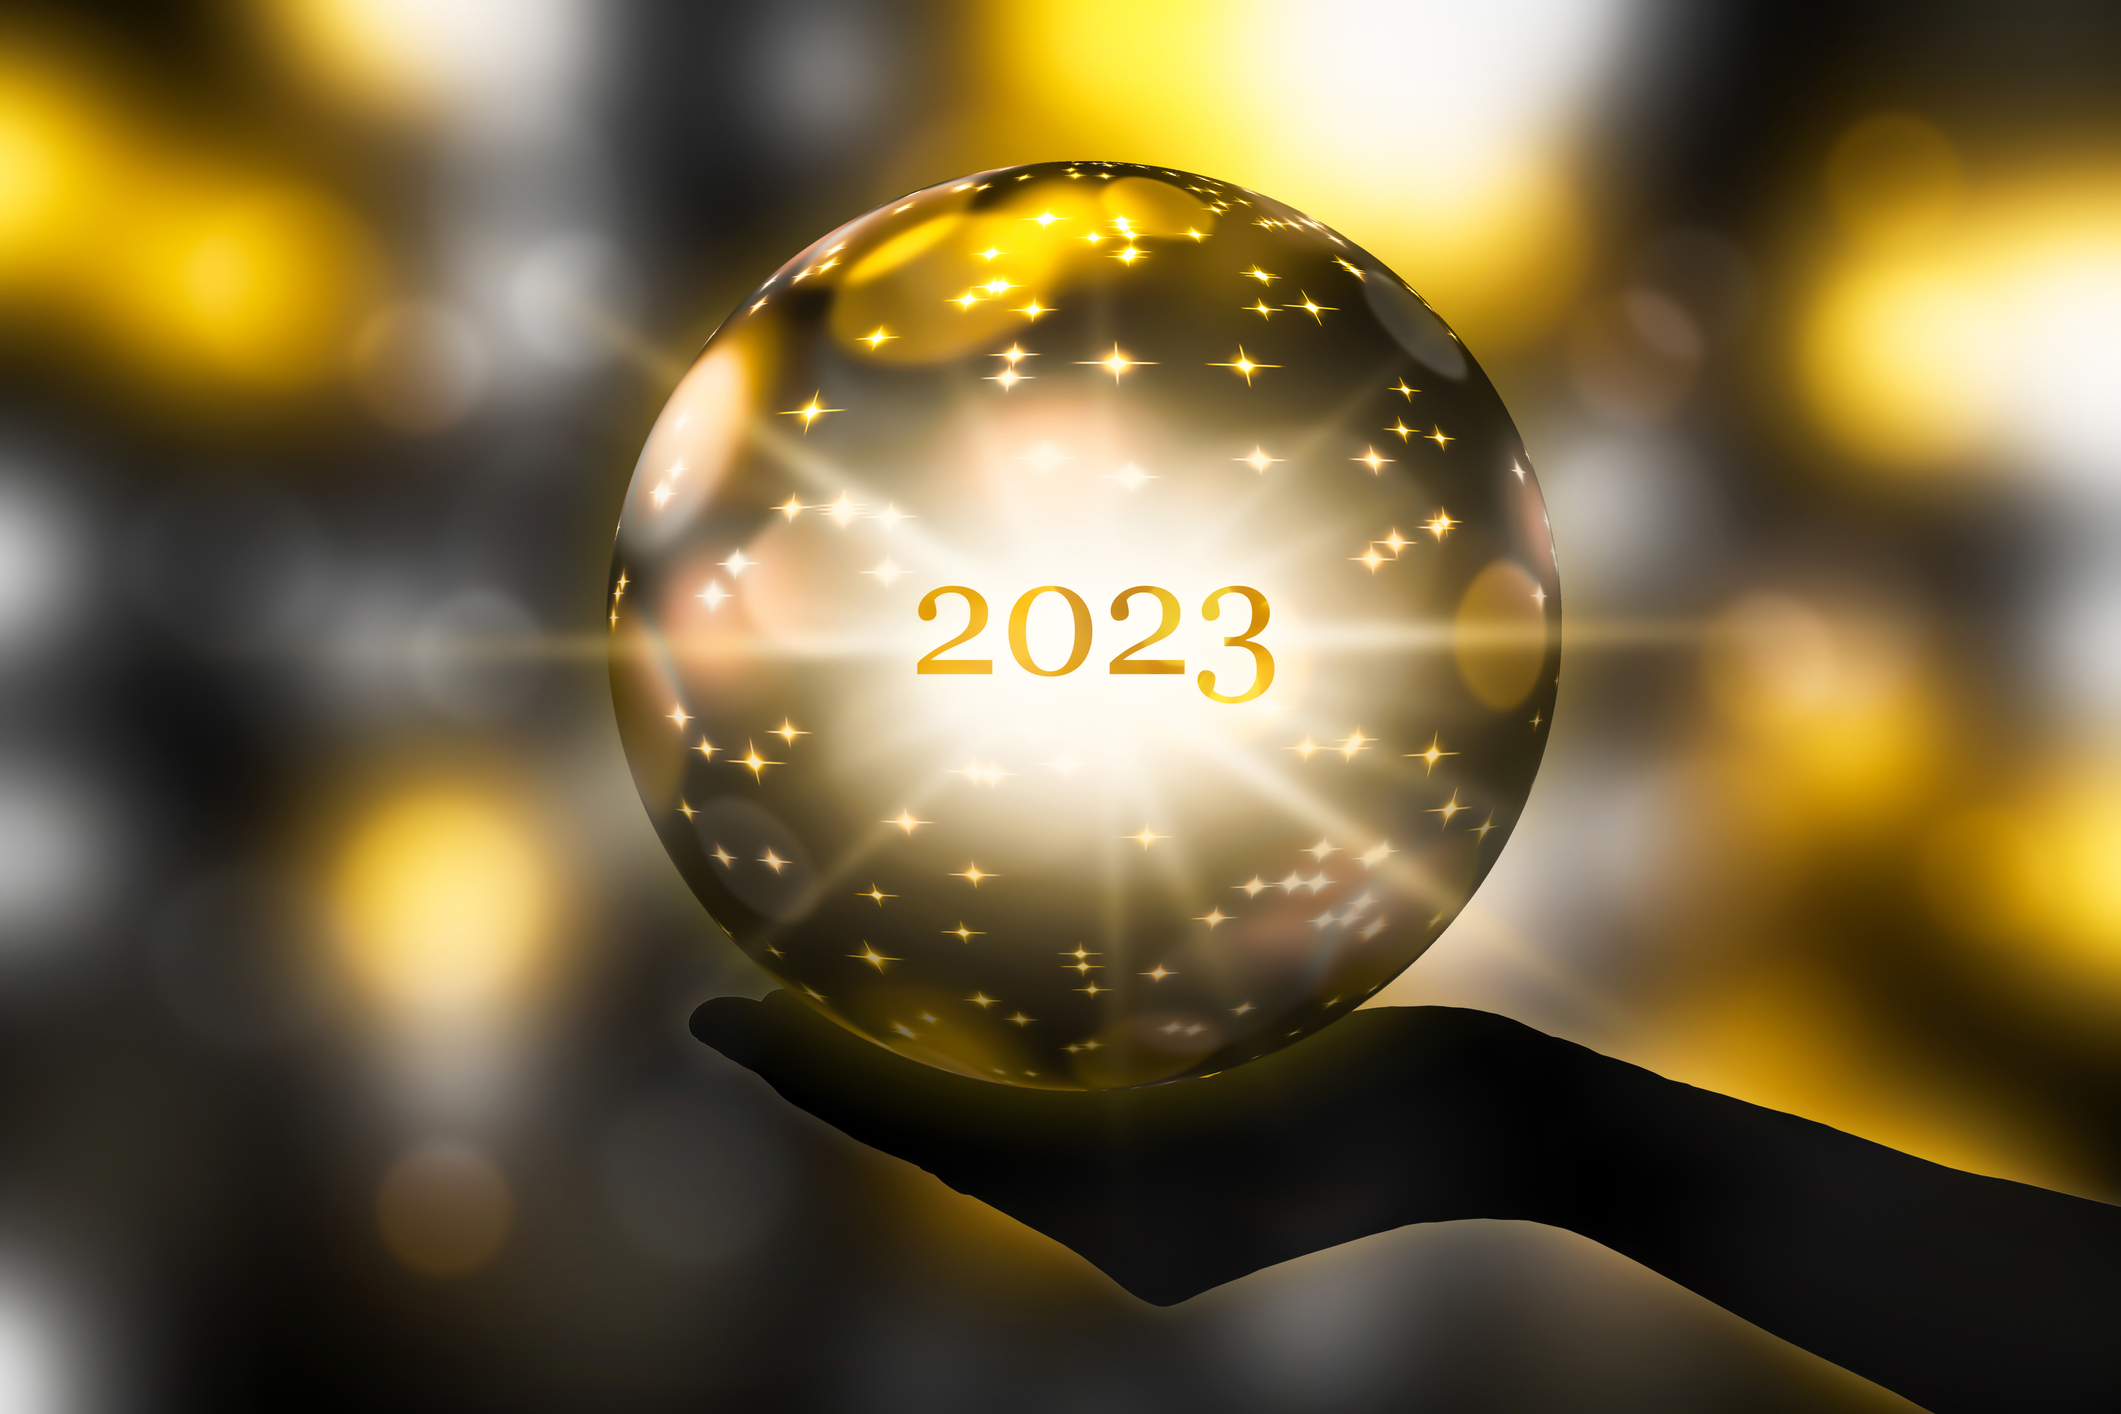 Looking into the crystal ball in 2023